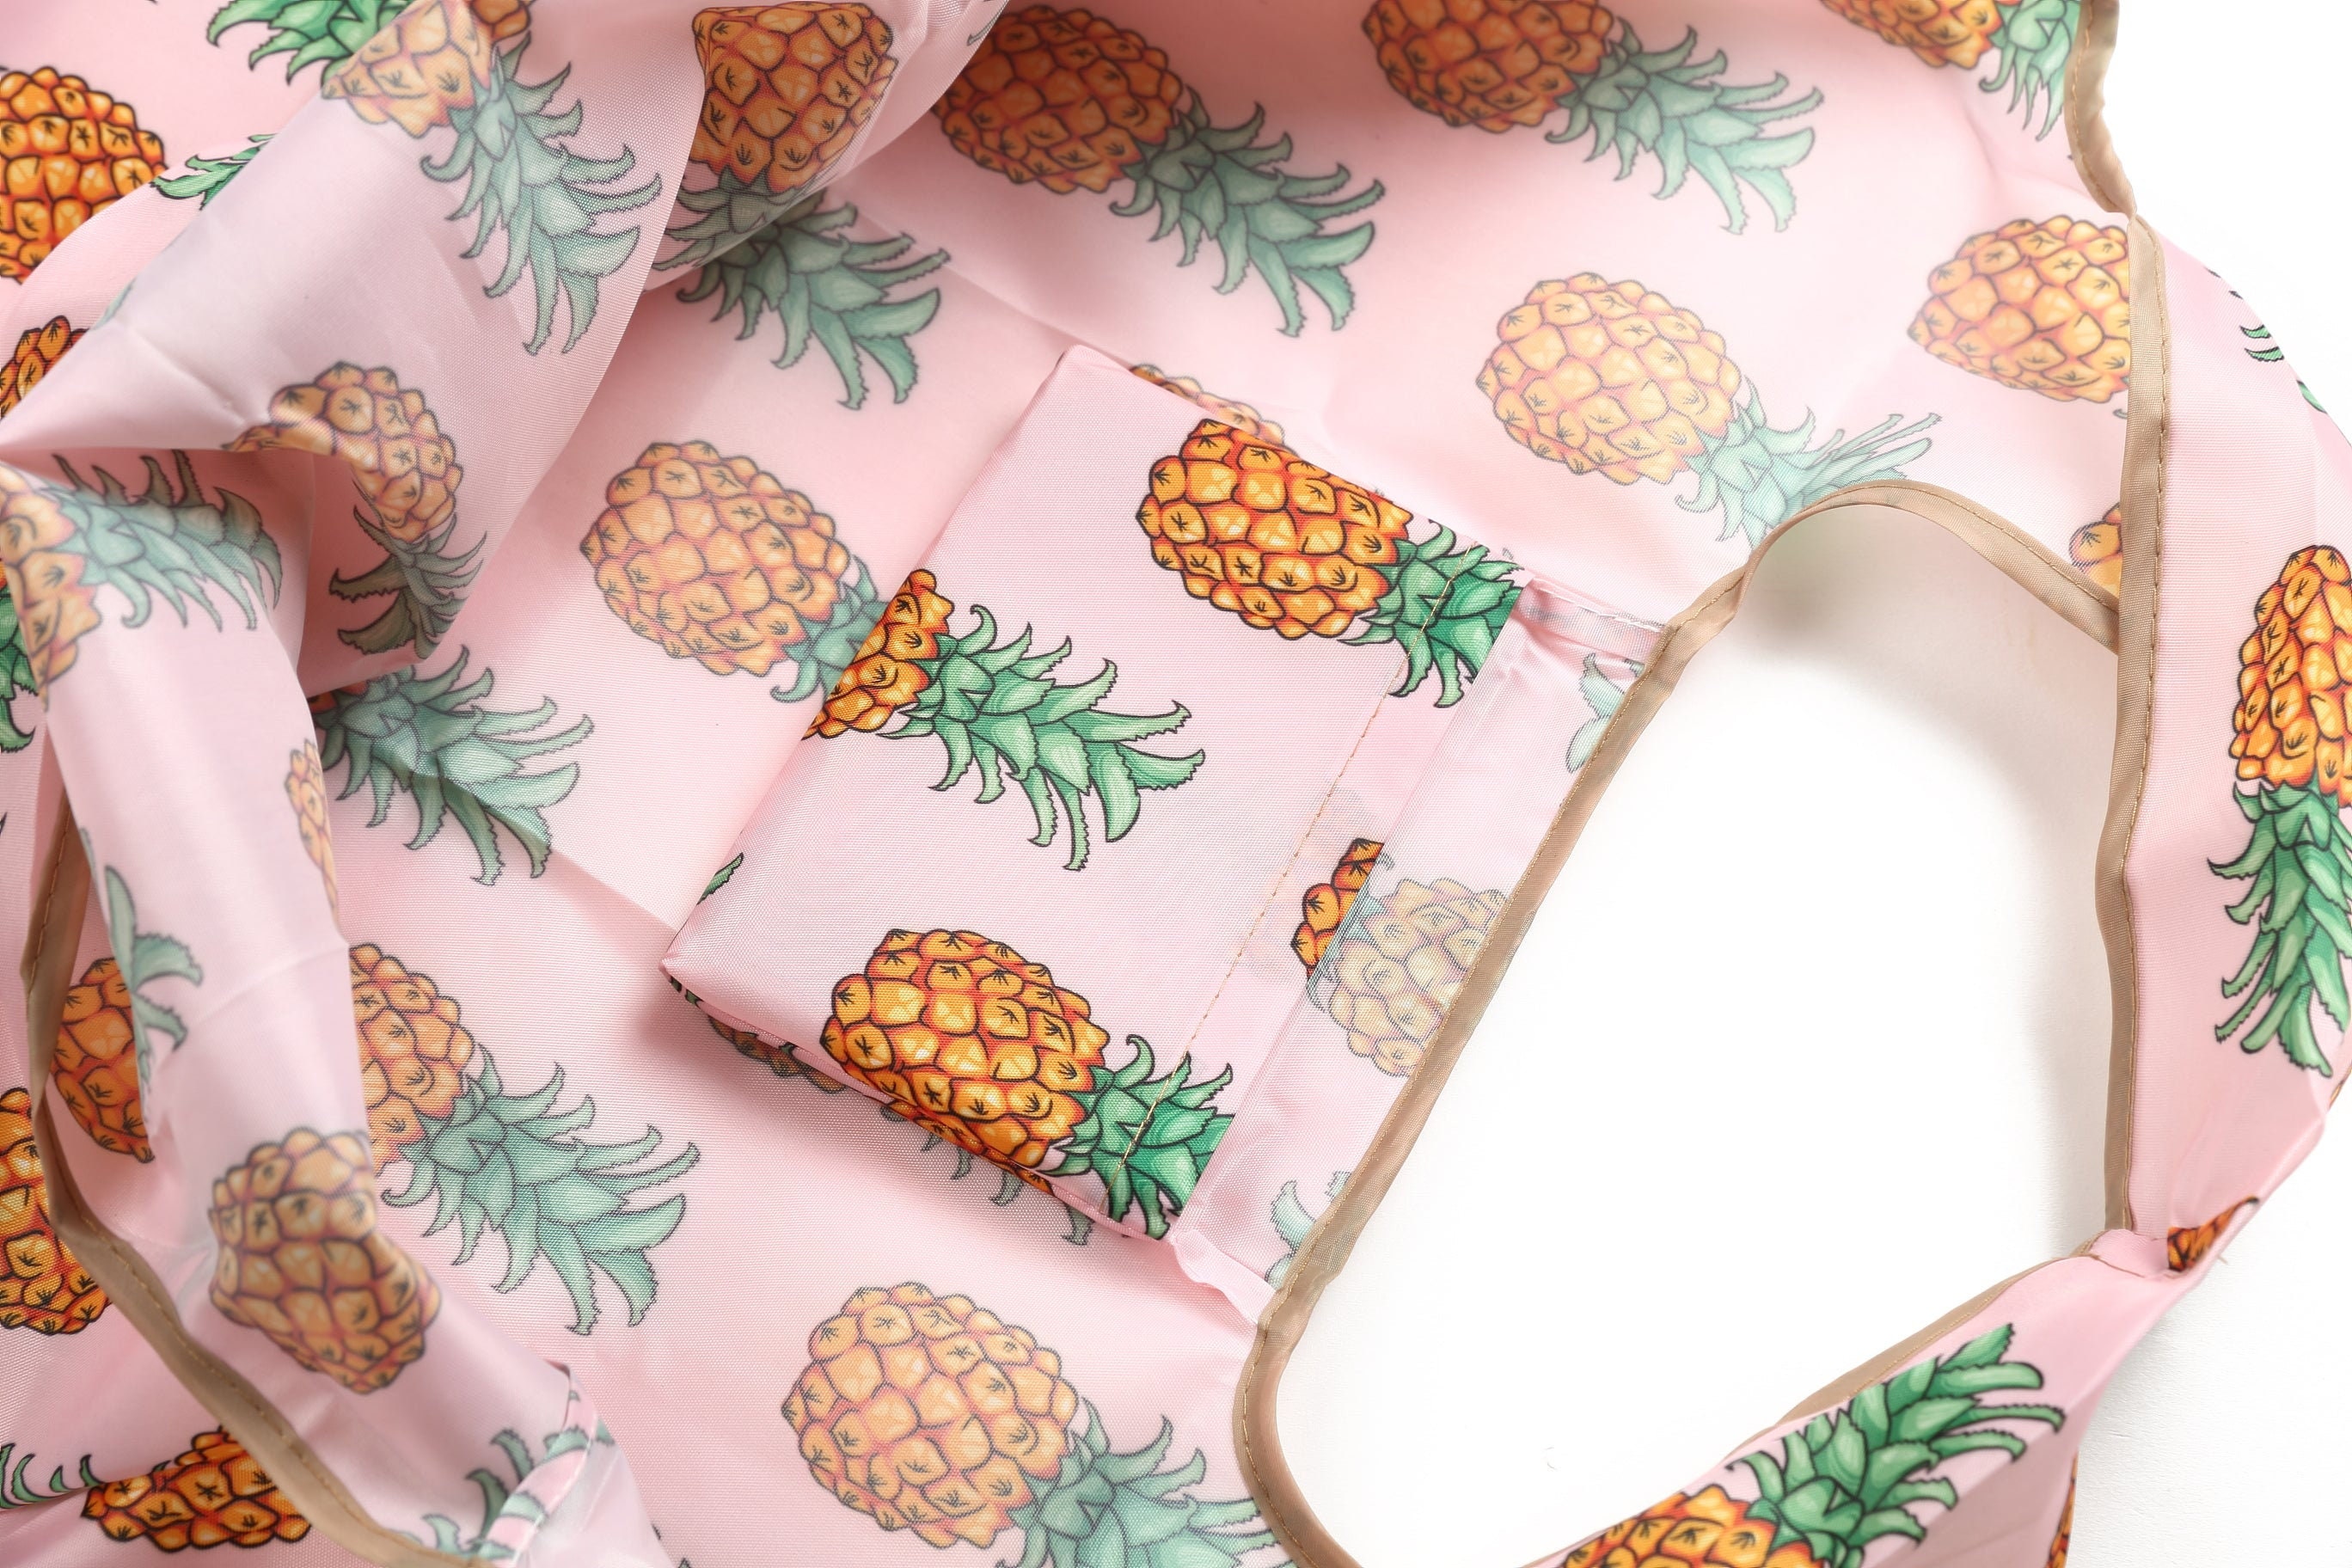 Discover Pineapple Pink Shopping Tote Bags